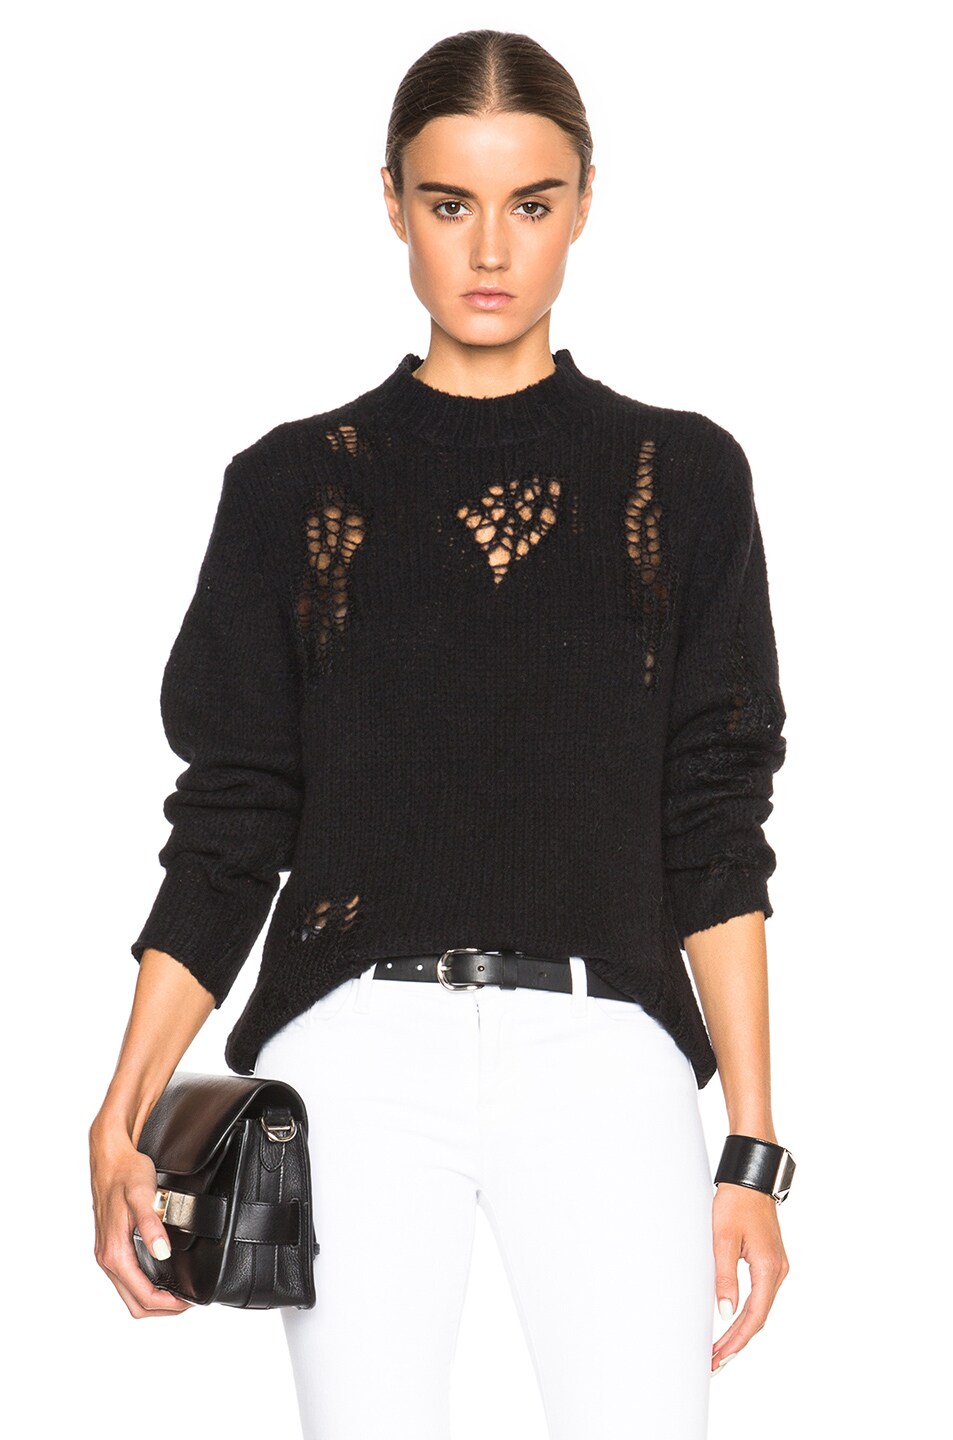 Image 1 of 3.1 phillip lim Dropped Needle Lace Sweater in Black